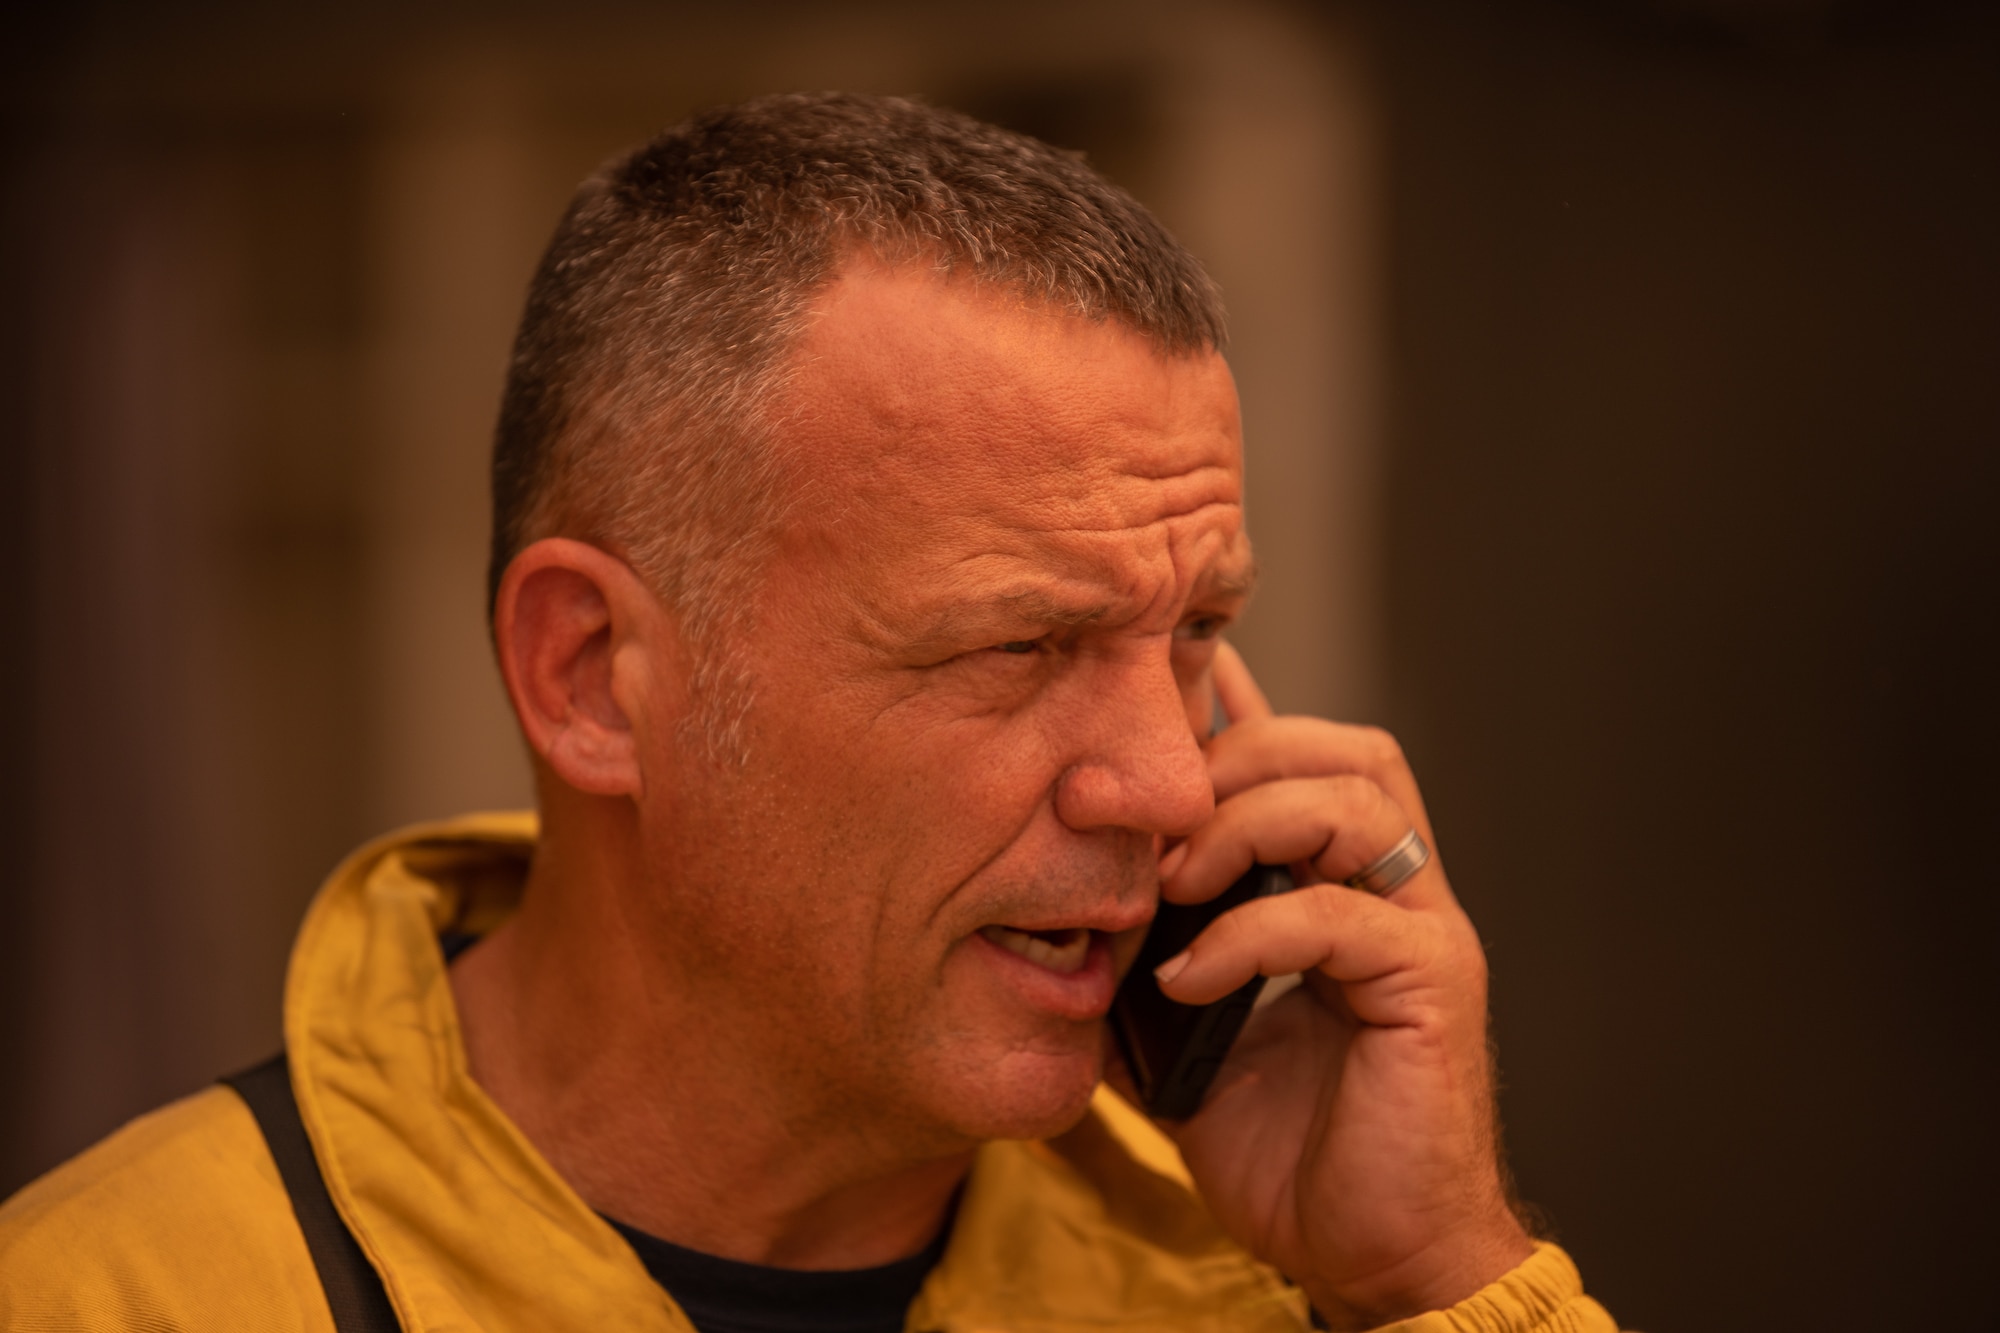 A fire chief talks on the phone about information regarding the fire.